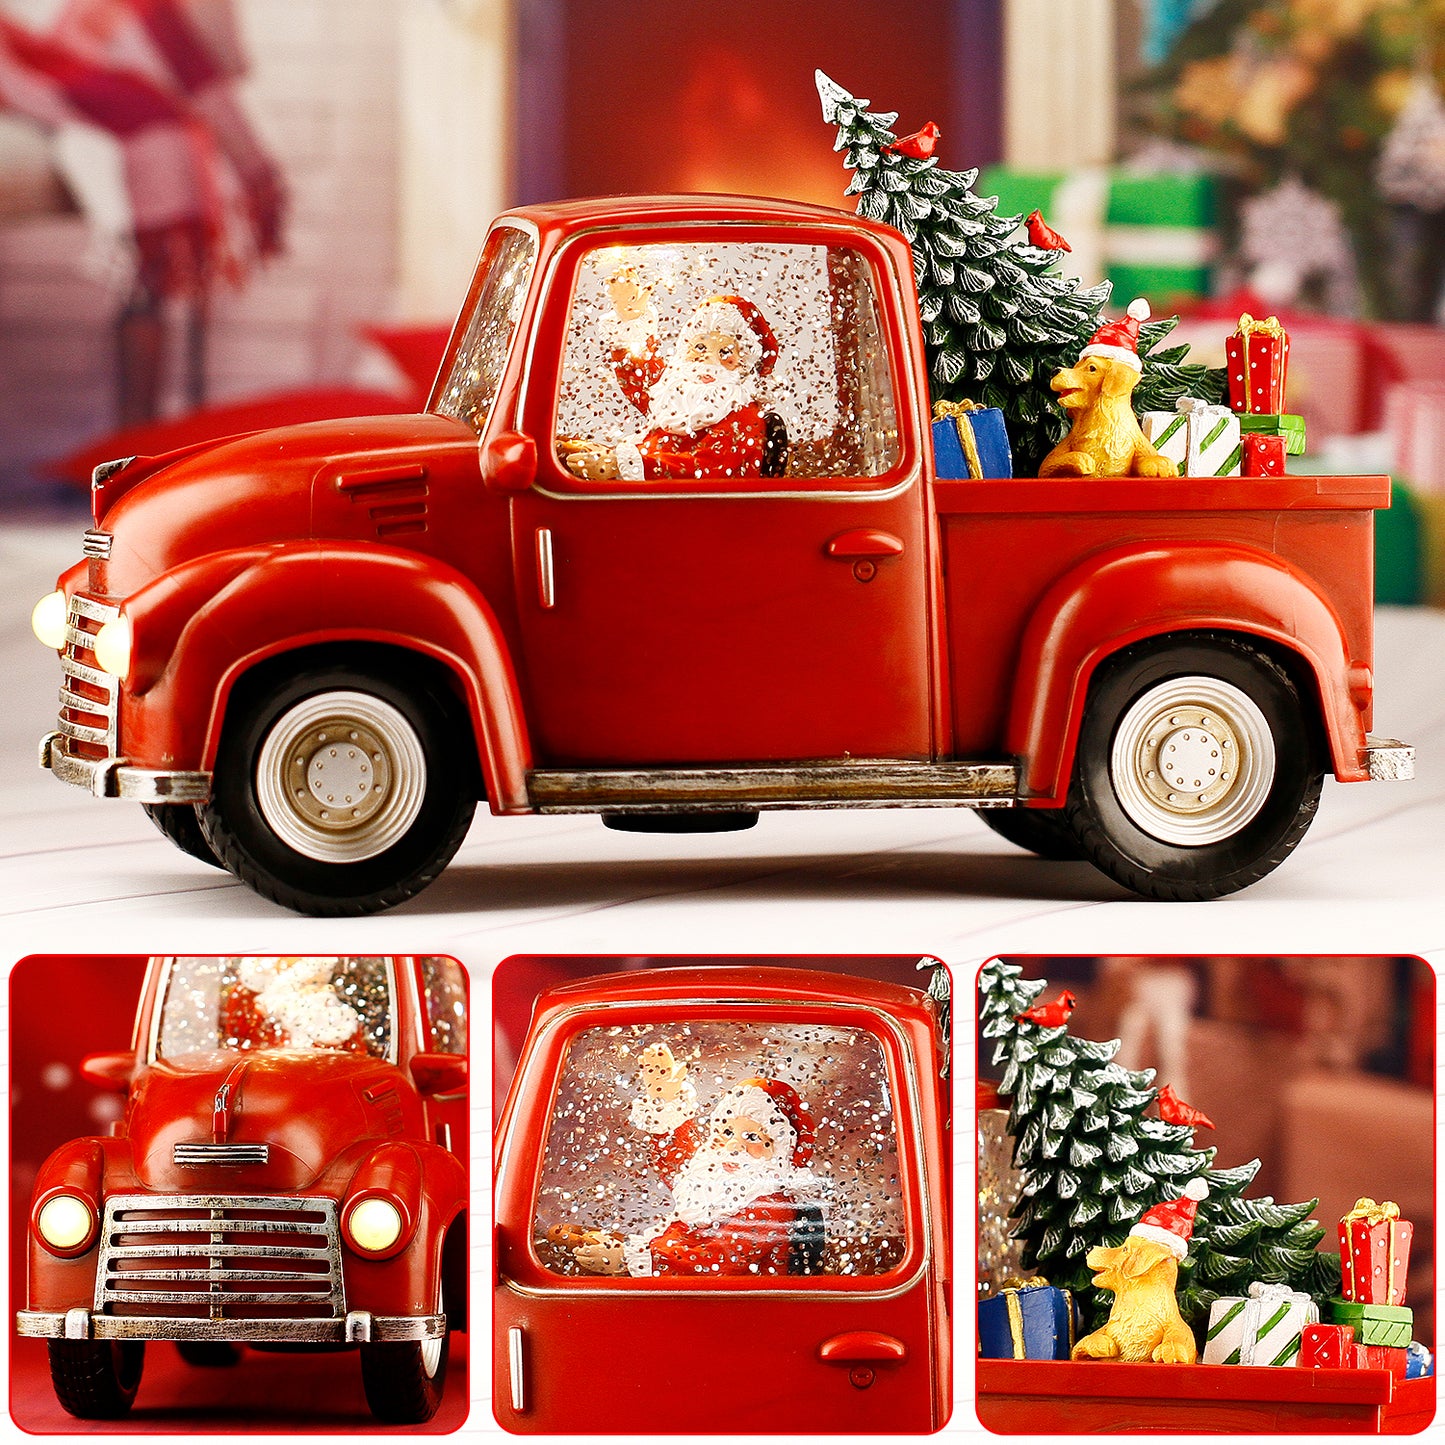 Christmas Red Truck Christmas Tree Santa Claus Driving Car Lighted Swirling Glitter Snow Globe Kids Toy Vintage Truck Christmas Decor